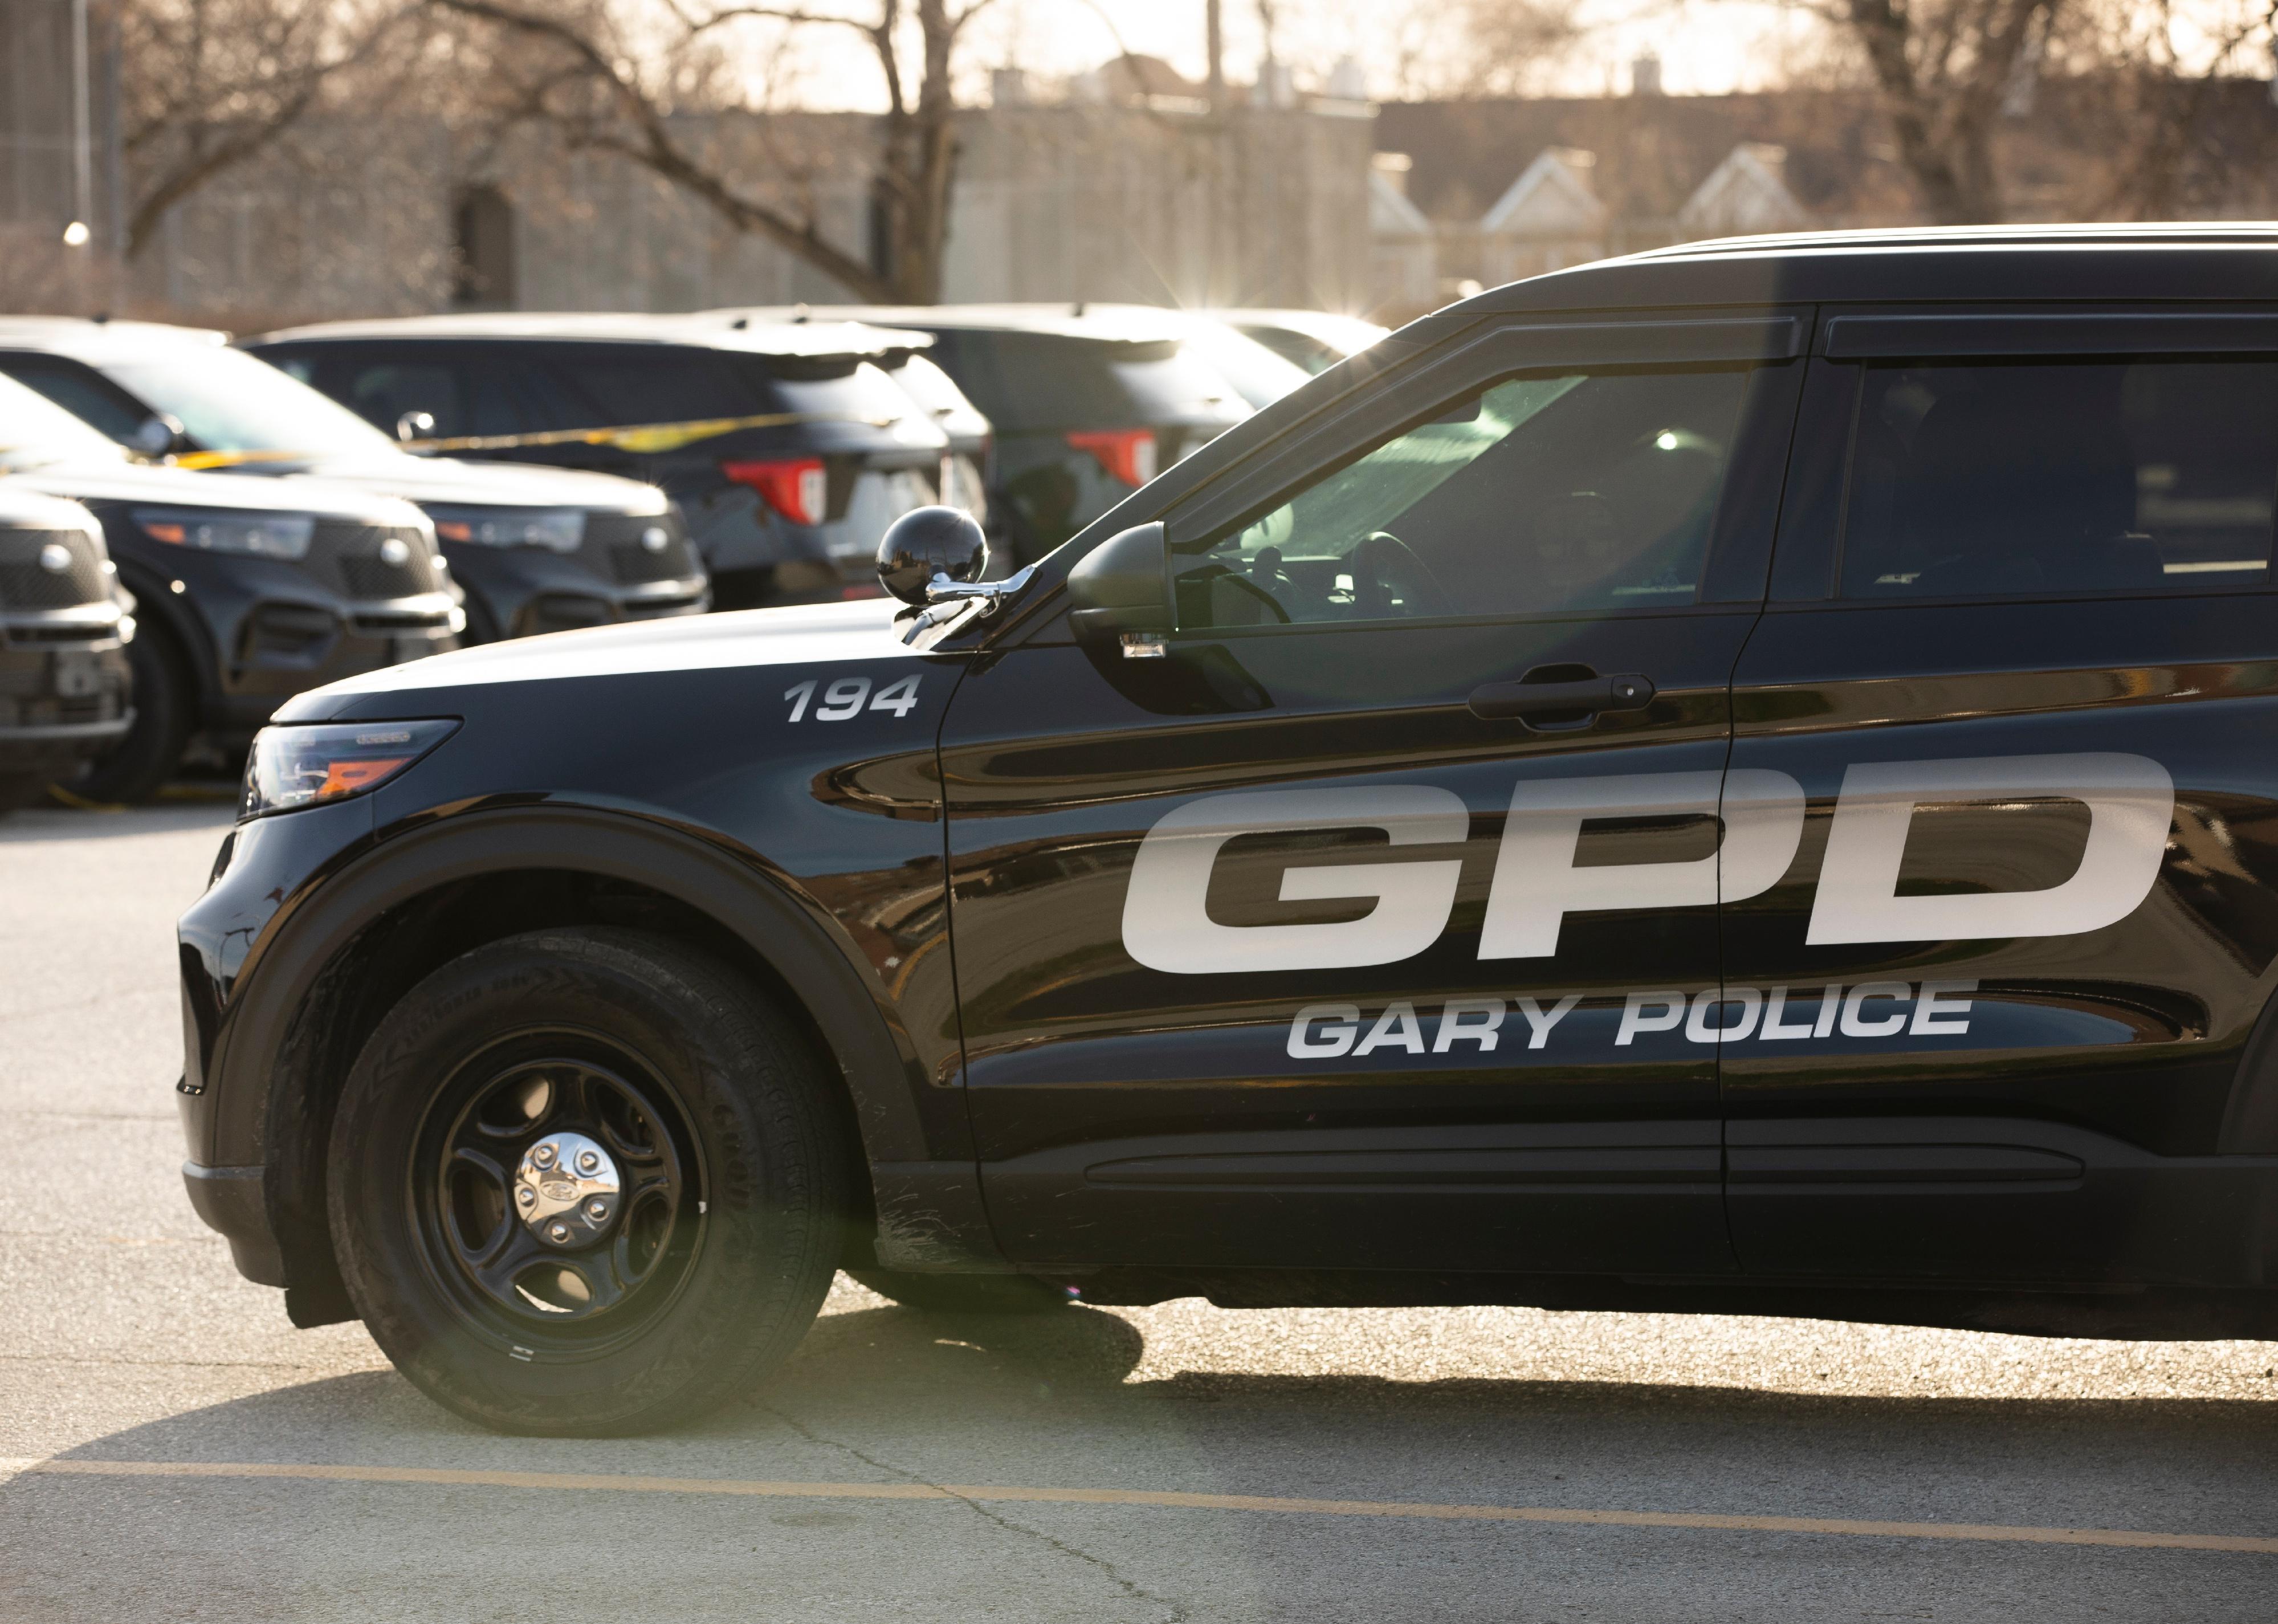 Afternoon light shines on a Gary Police Department cruiser.